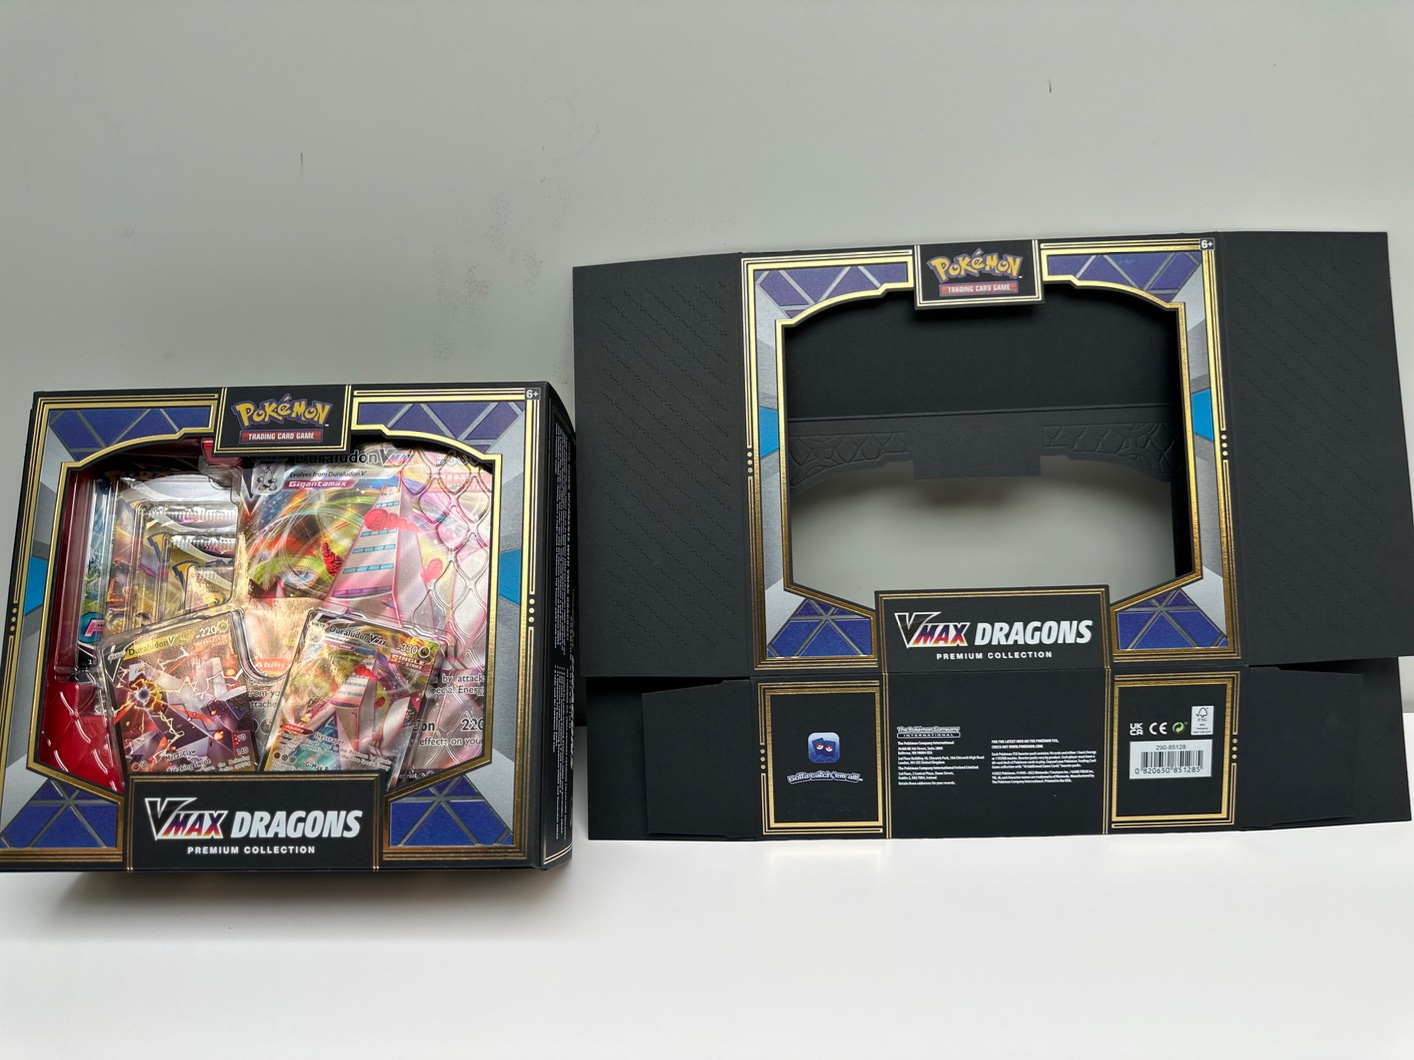 VMax Dragons Premium Collection Packaging Box